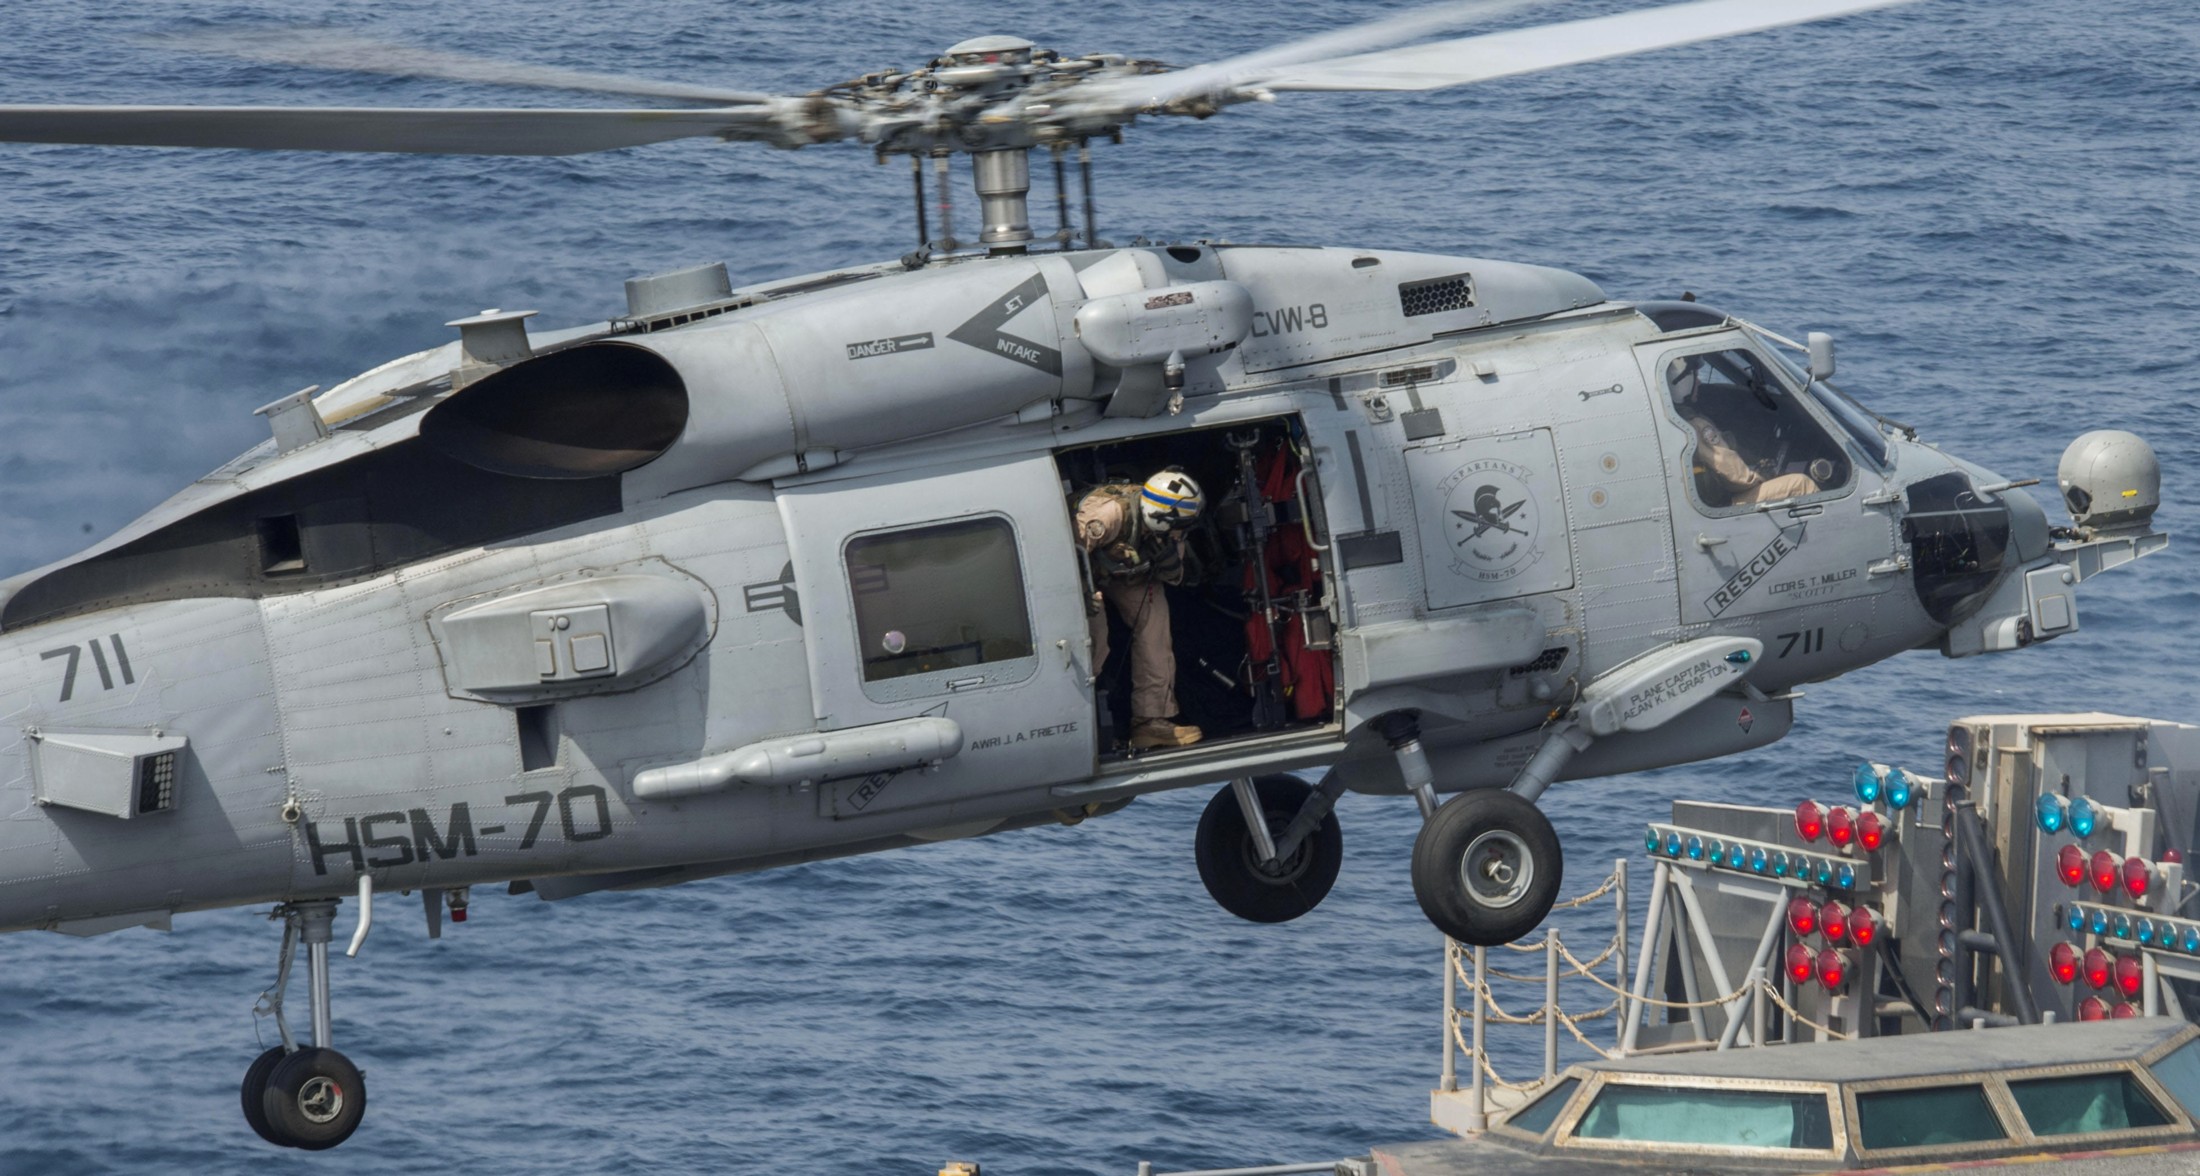 hsm-70 spartans helicopter maritime strike squadron mh-60r seahawk 2014 91